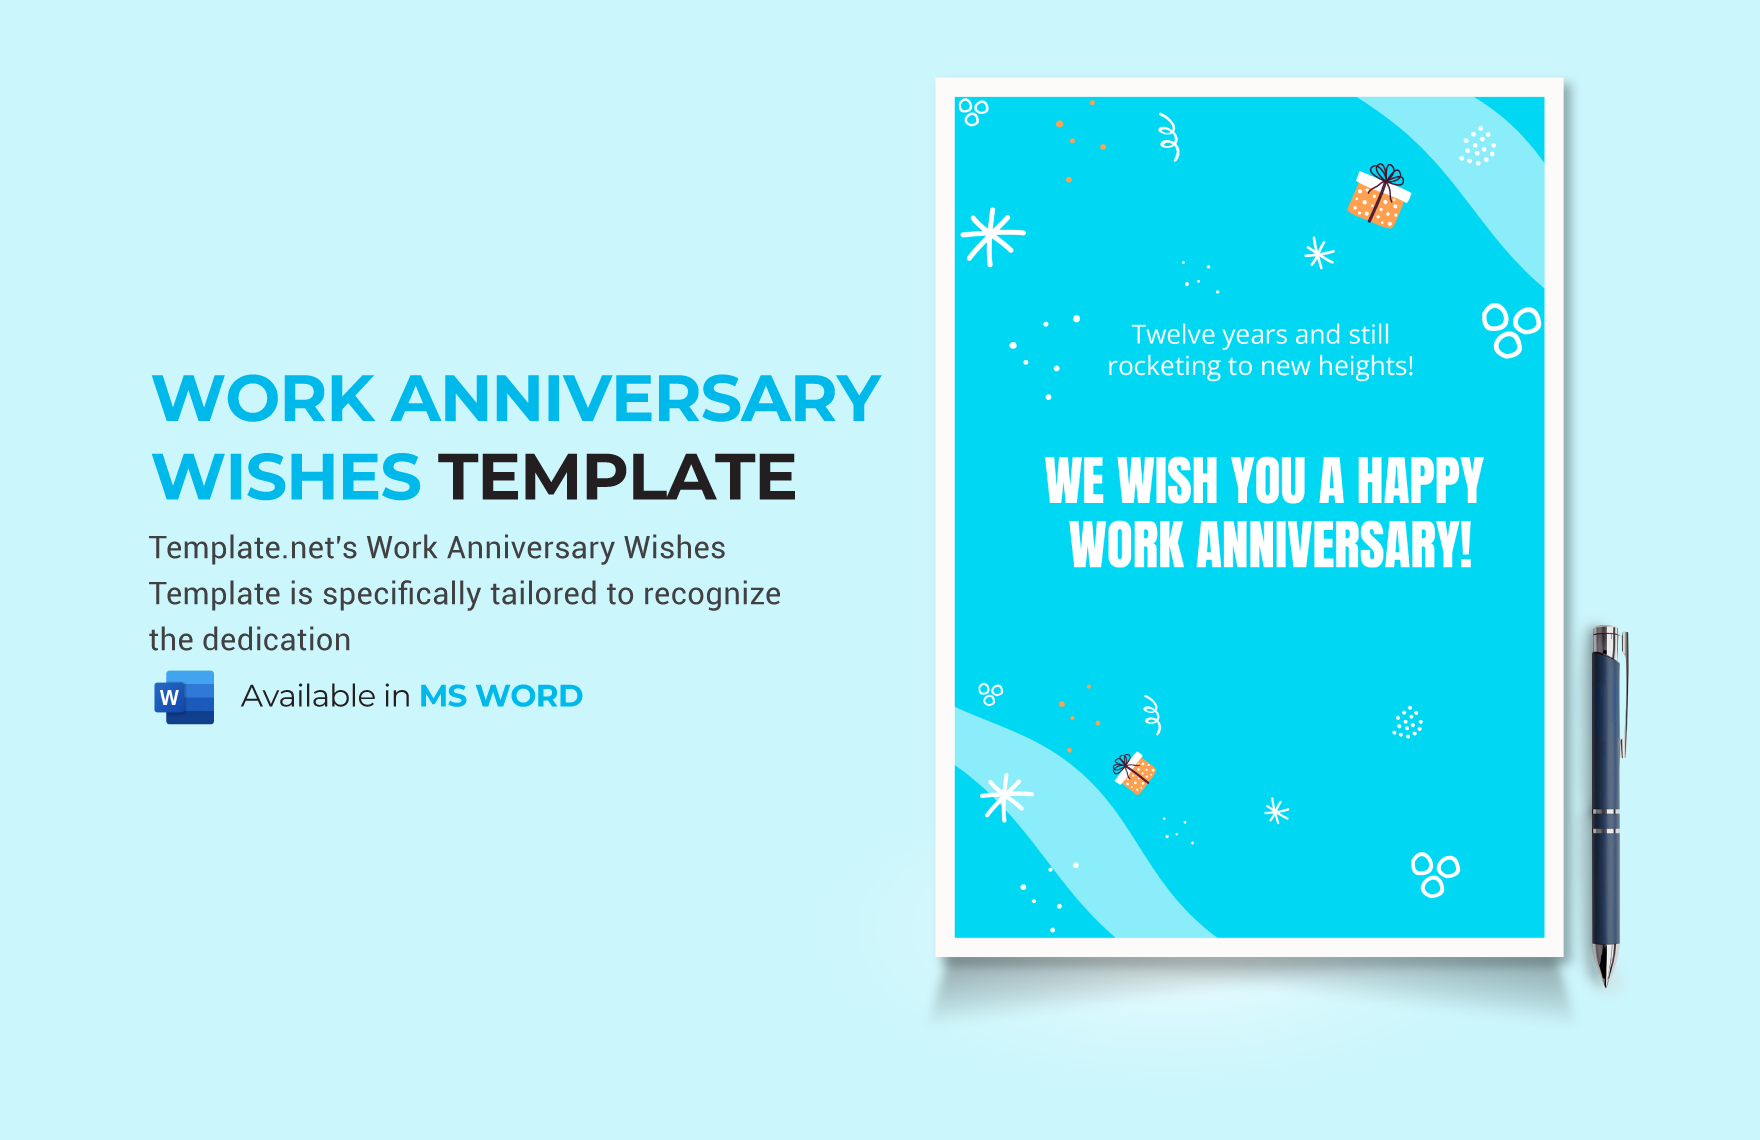 Work Anniversary Wishes Template in Word - Download | Template.net